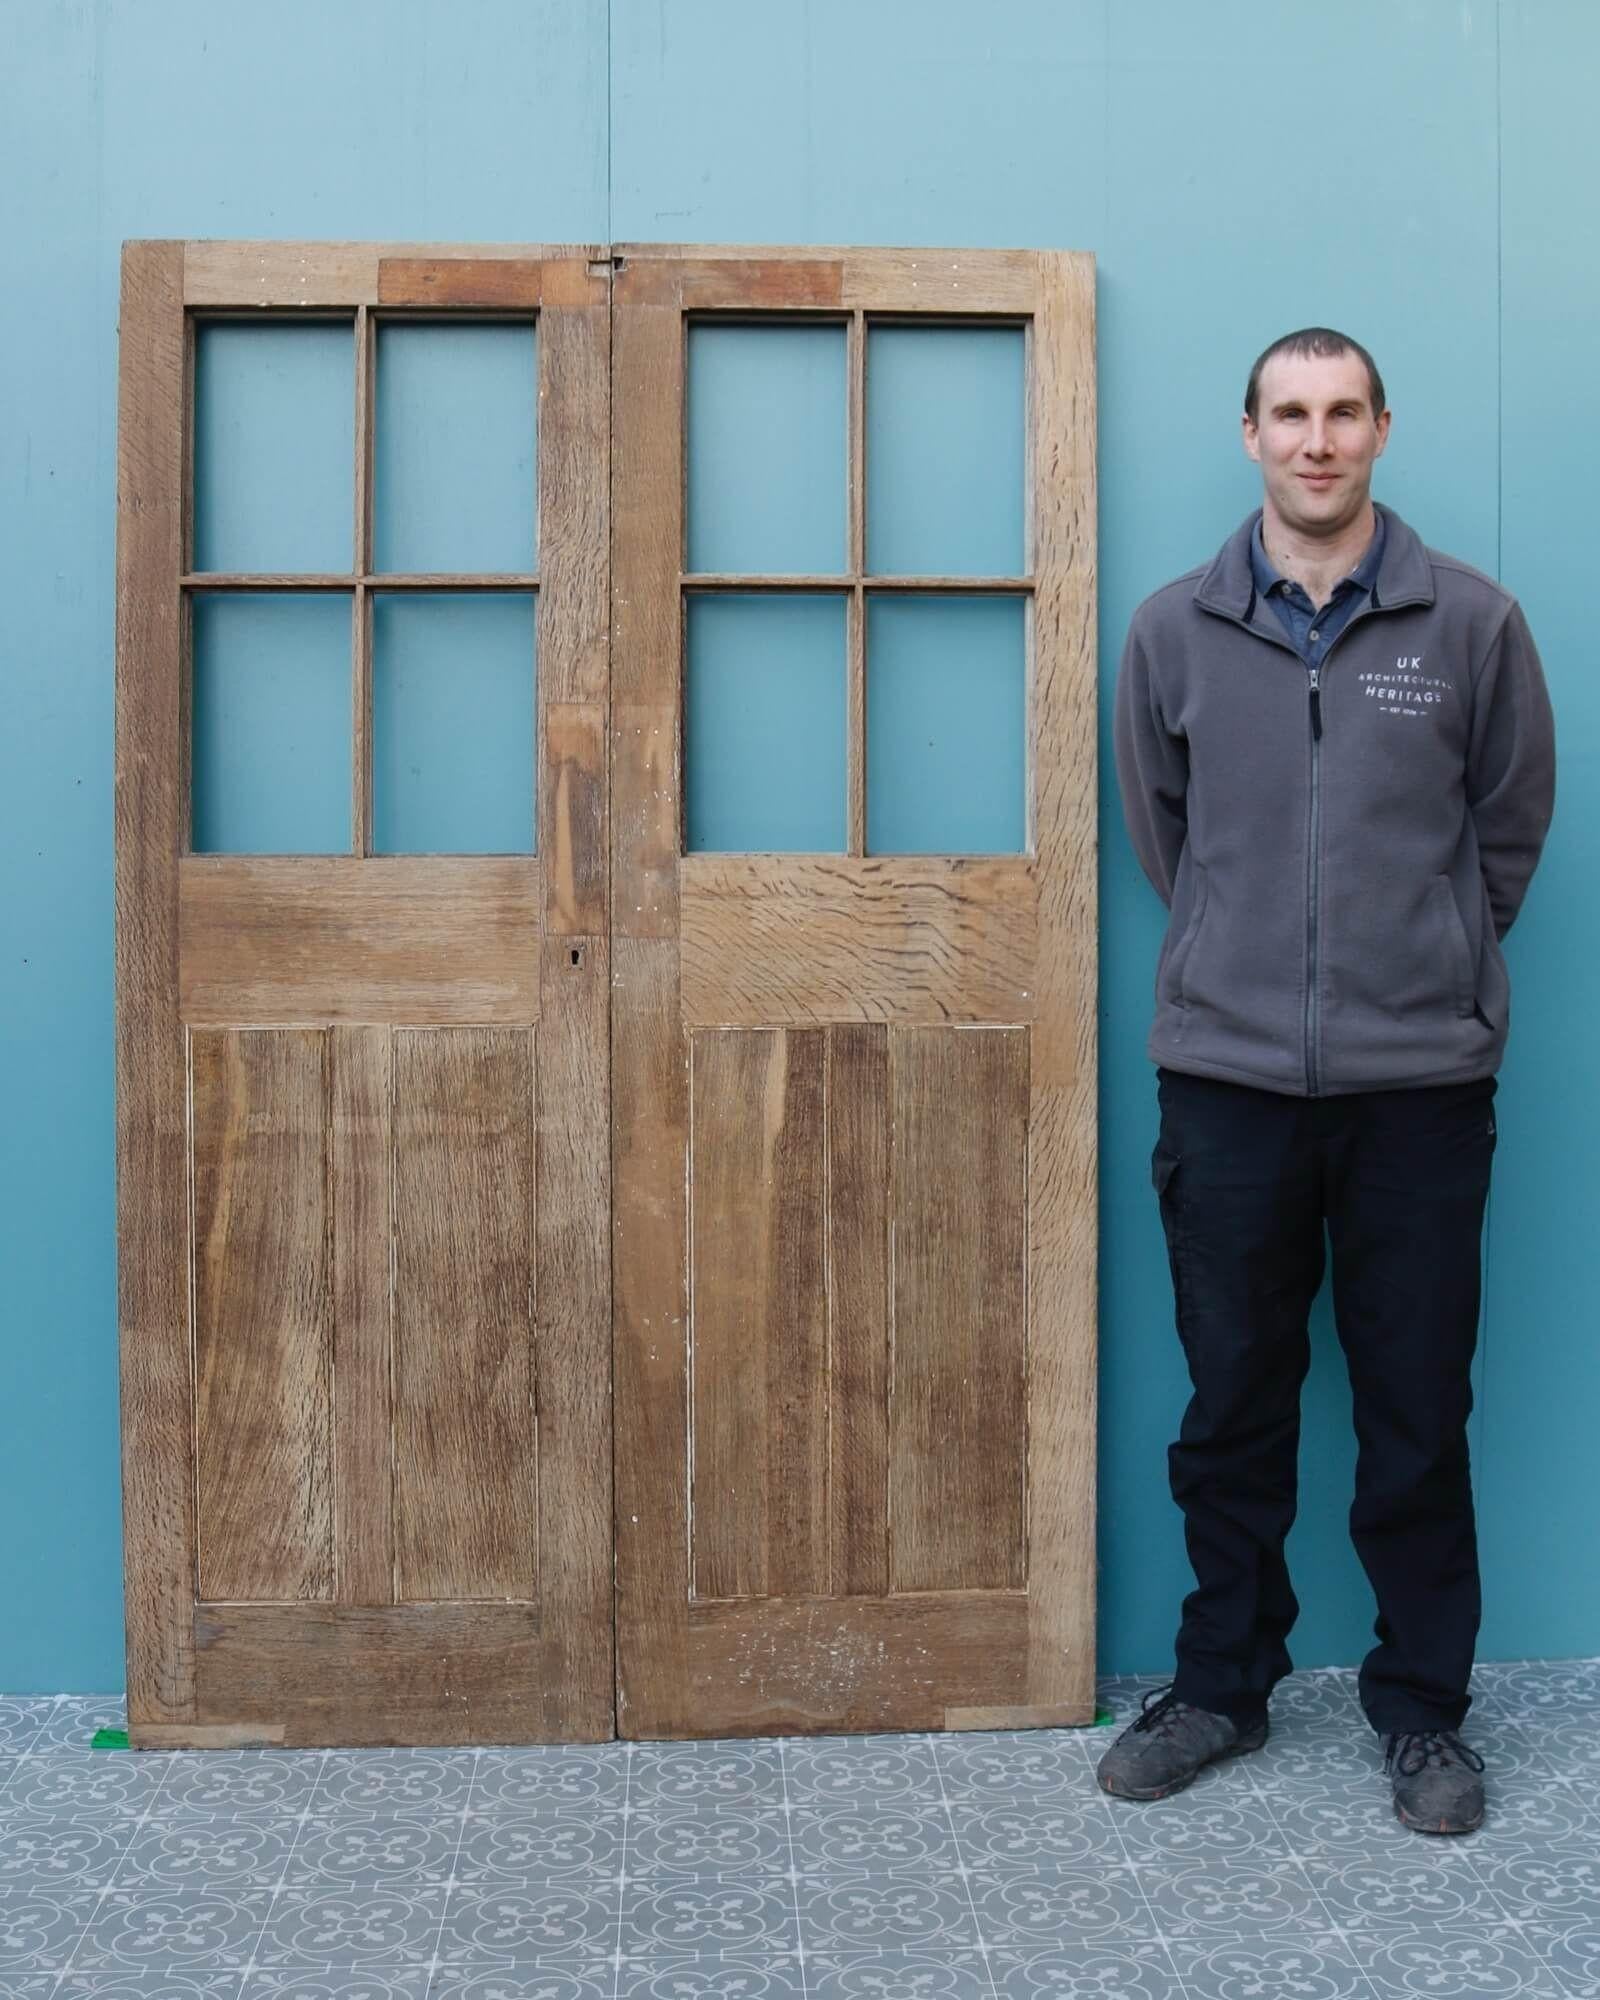 A beautiful set of unglazed Edwardian stripped oak double doors circa 1900 suitable for interior or exterior use. These reclaimed doors are of handsome quality and craftsmanship, each designed with 4 empty panes for custom glazing of your choice